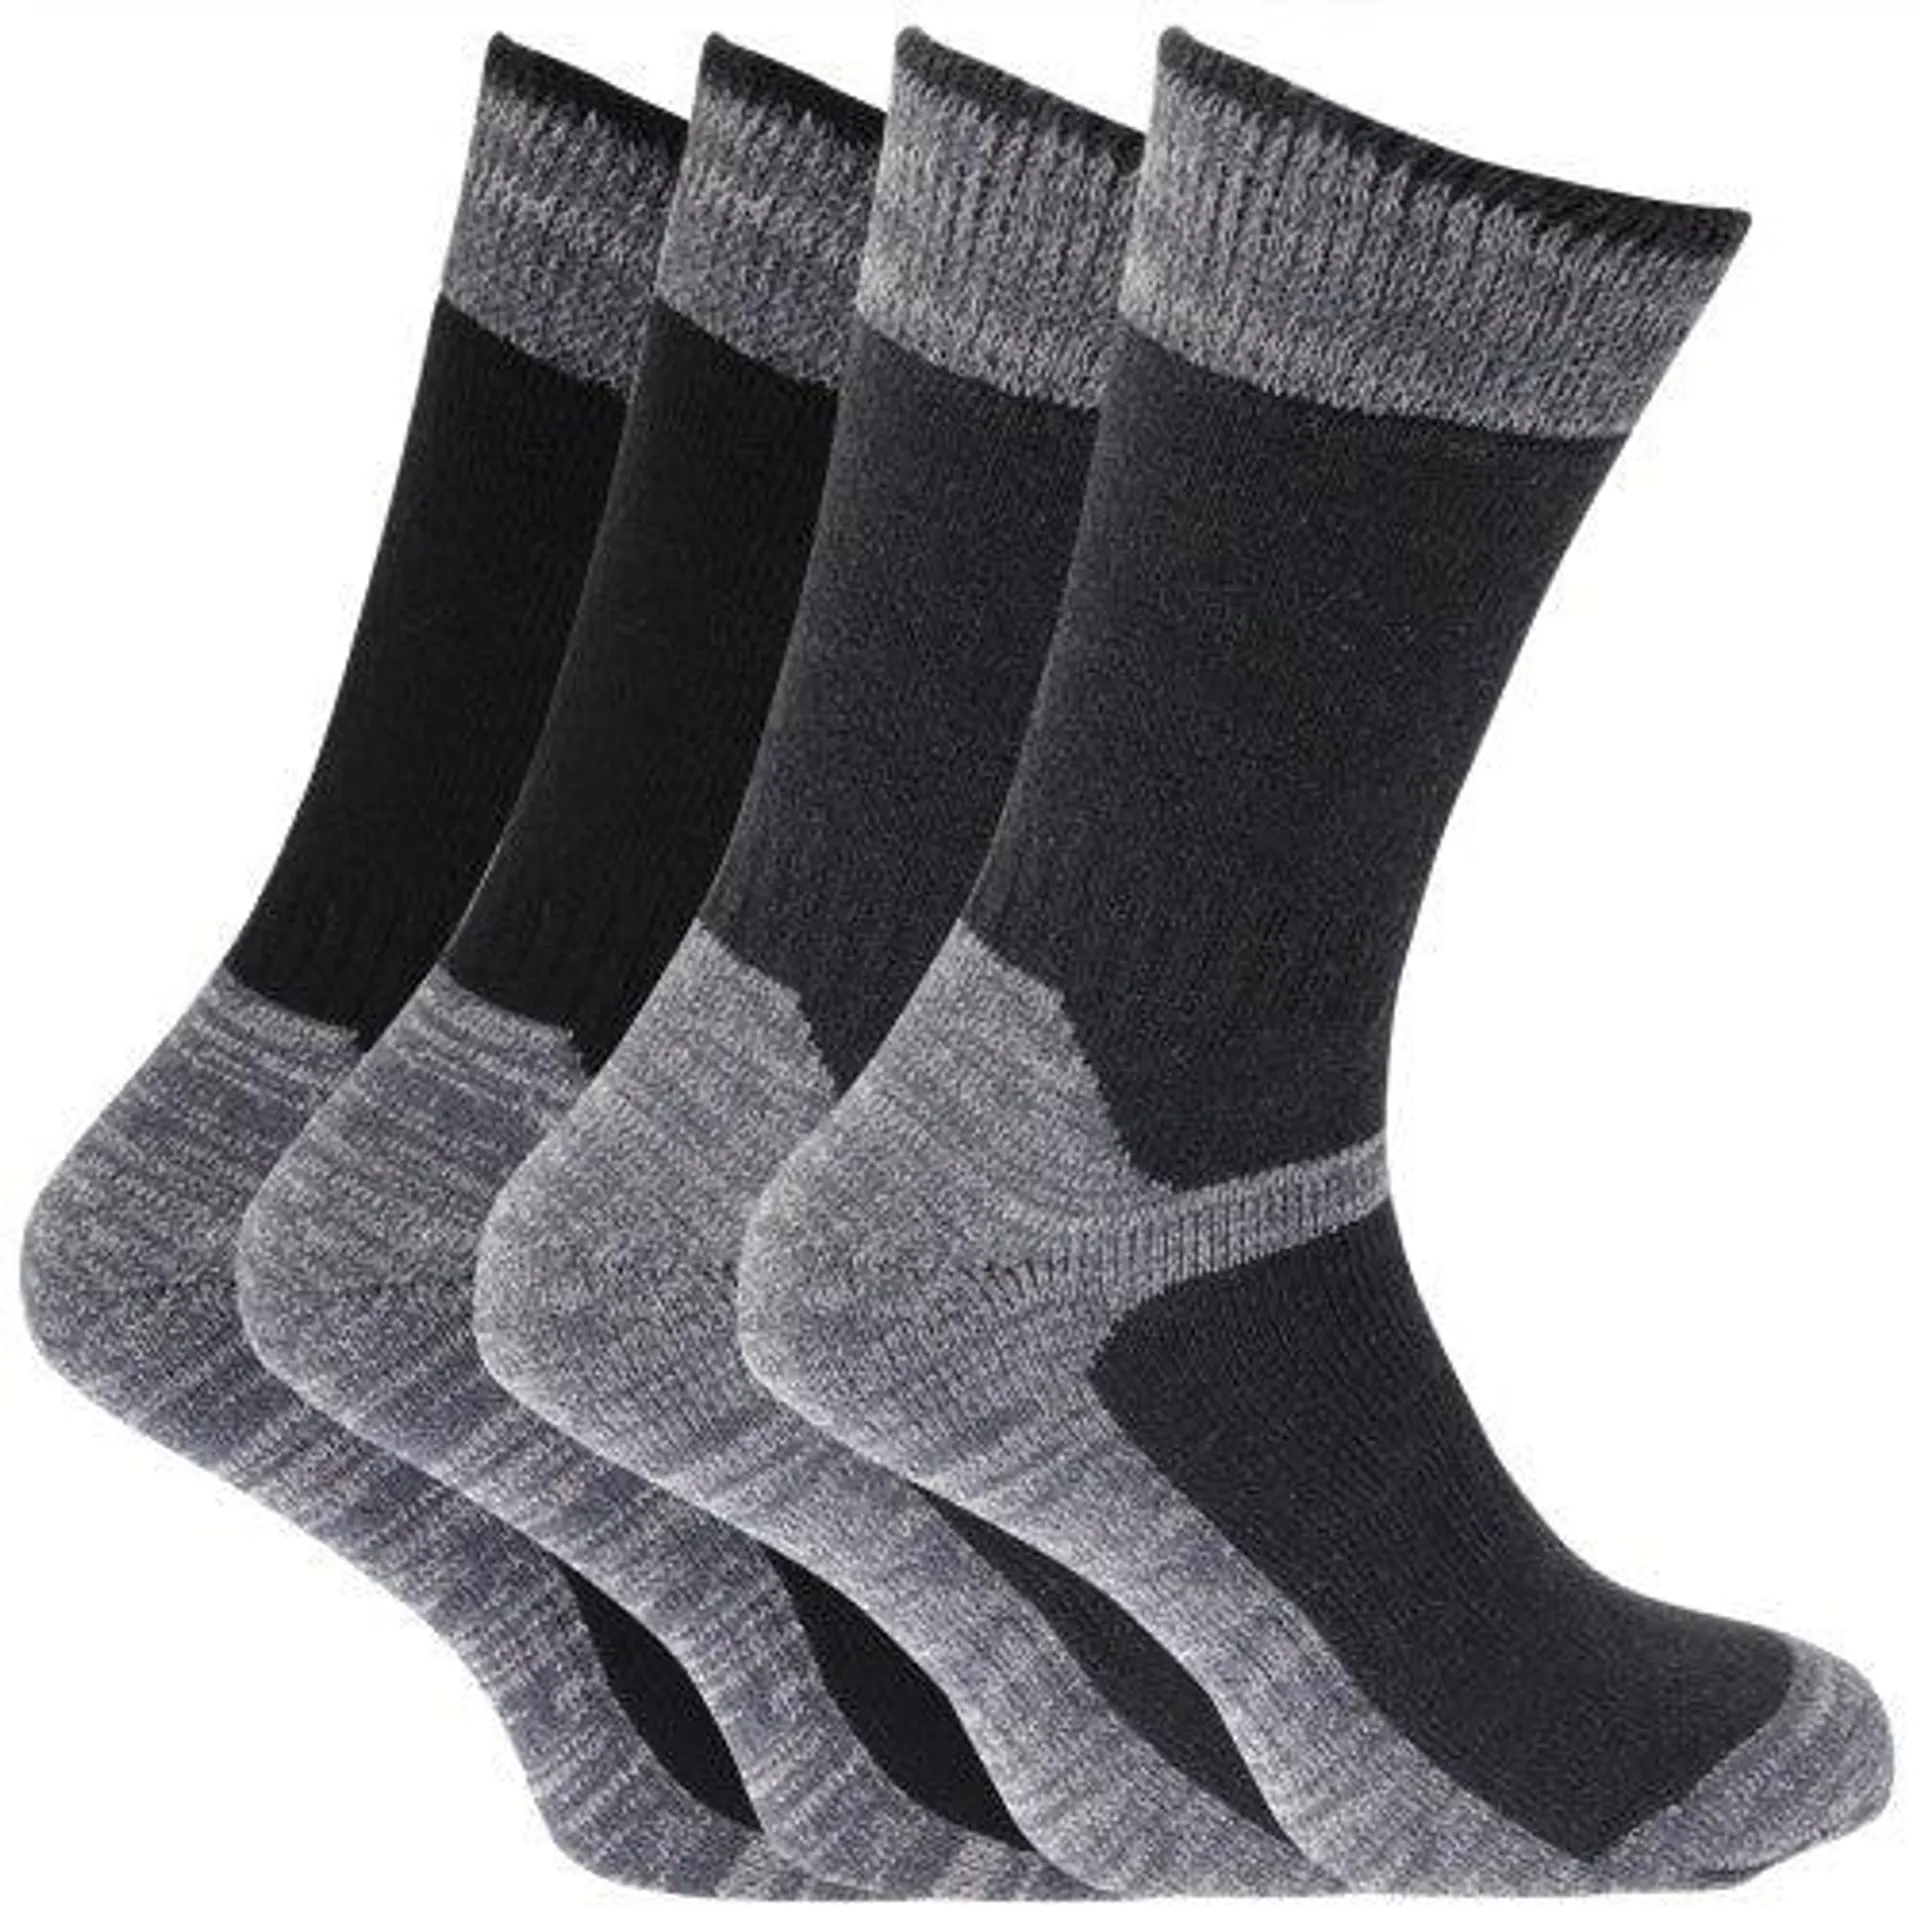 Mens Heavy Weight Reinforced Toe Work Boot Socks (Pack Of 4)